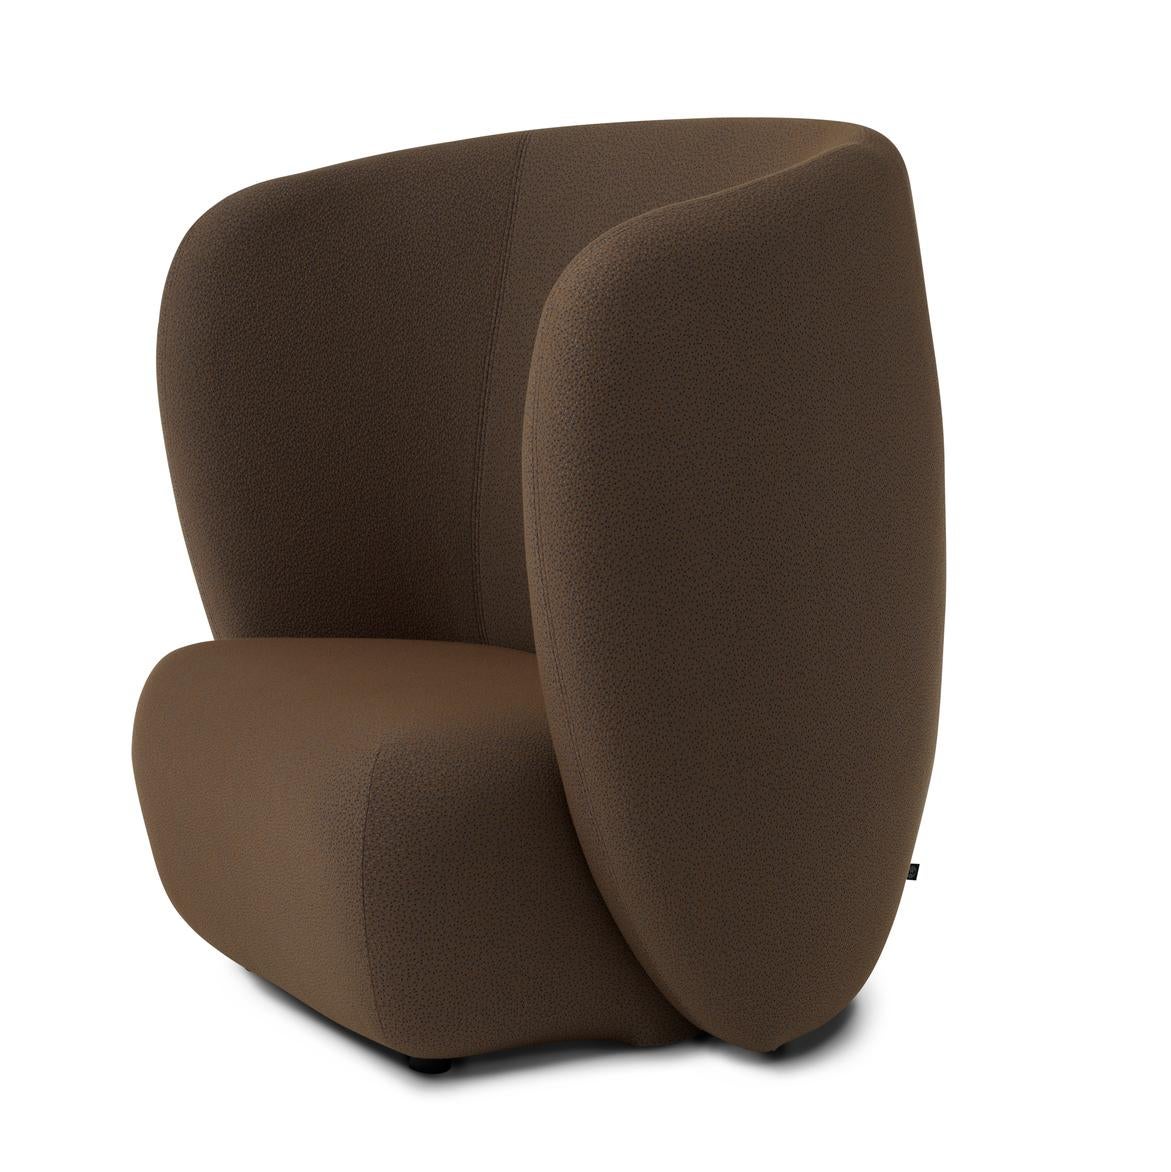 Post-Modern Haven Lounge Chair Sprinkles Cappuccino Brown by Warm Nordic For Sale